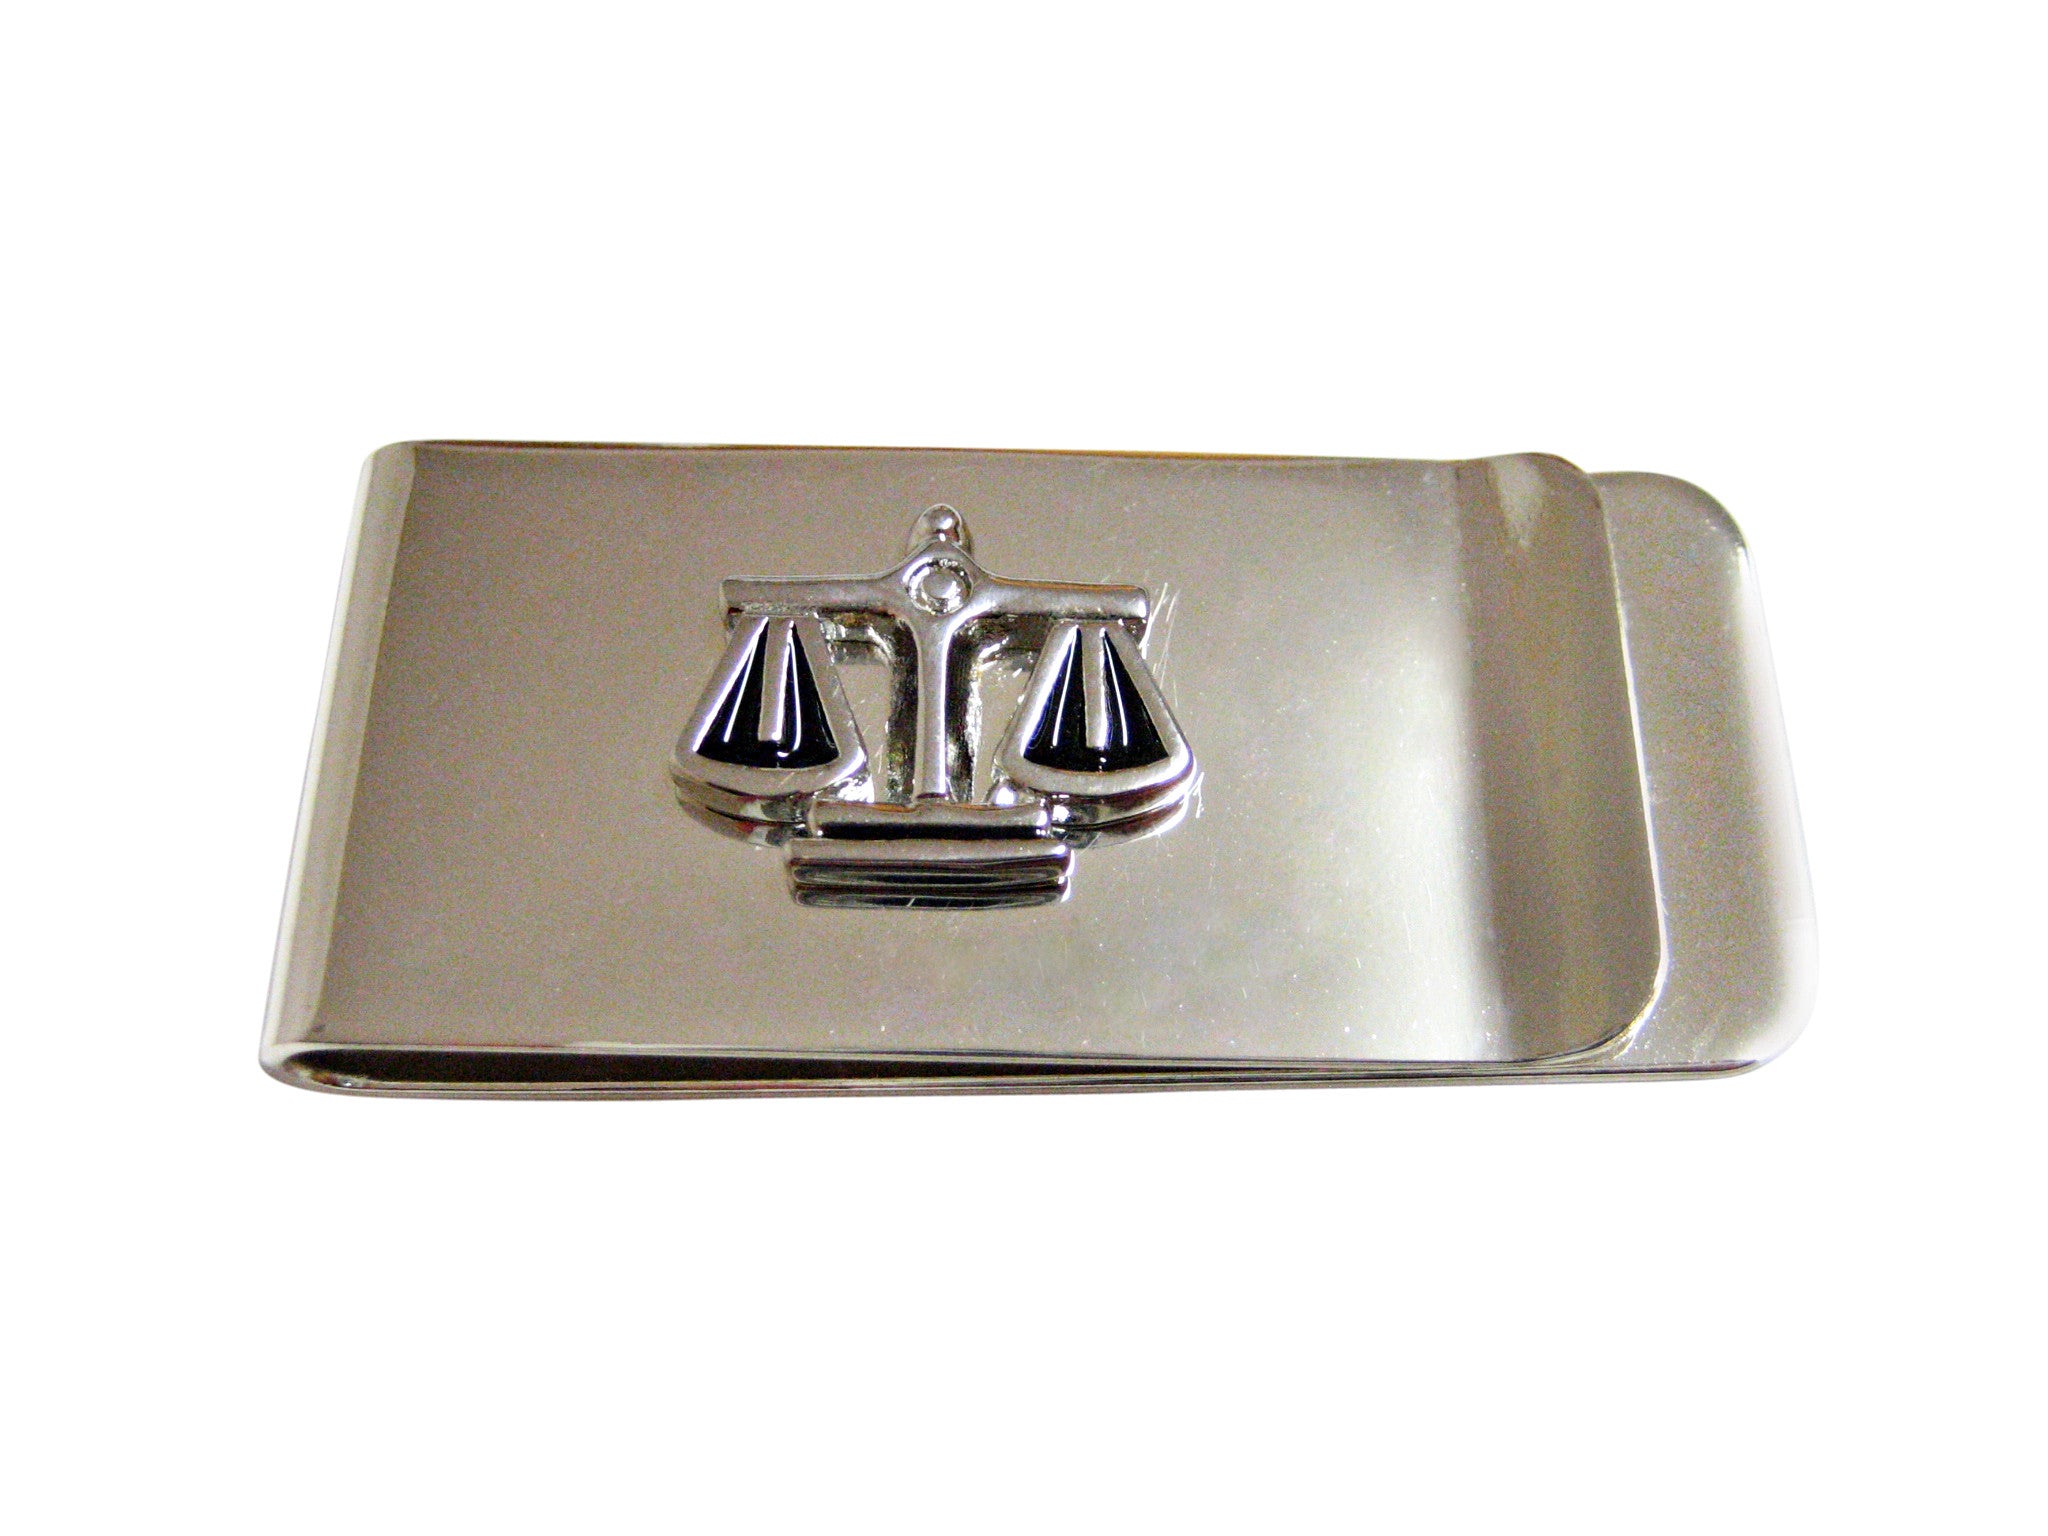 Black and Silver Toned Scale of Justice Money Clip